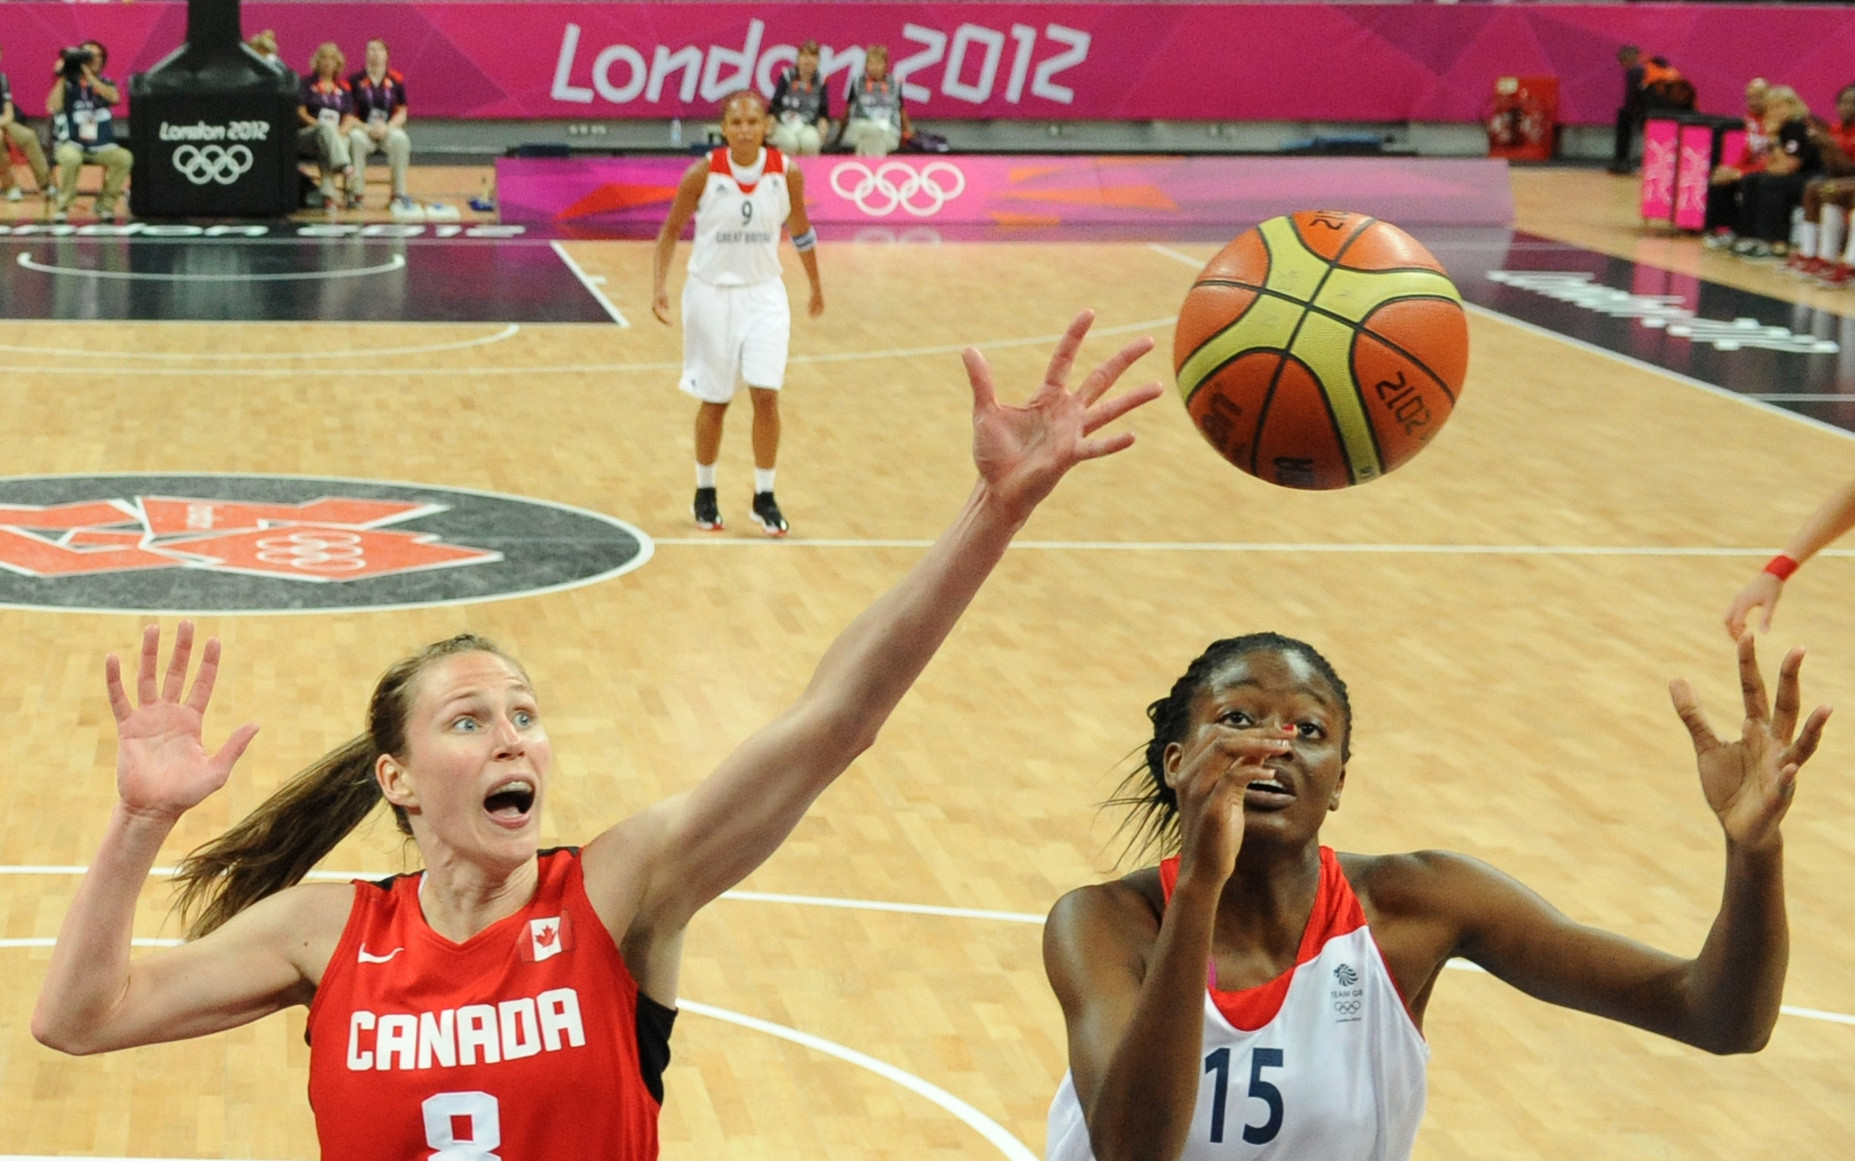  British basketball star upset Sport England and UK Sport favouring obscure Olympic sports